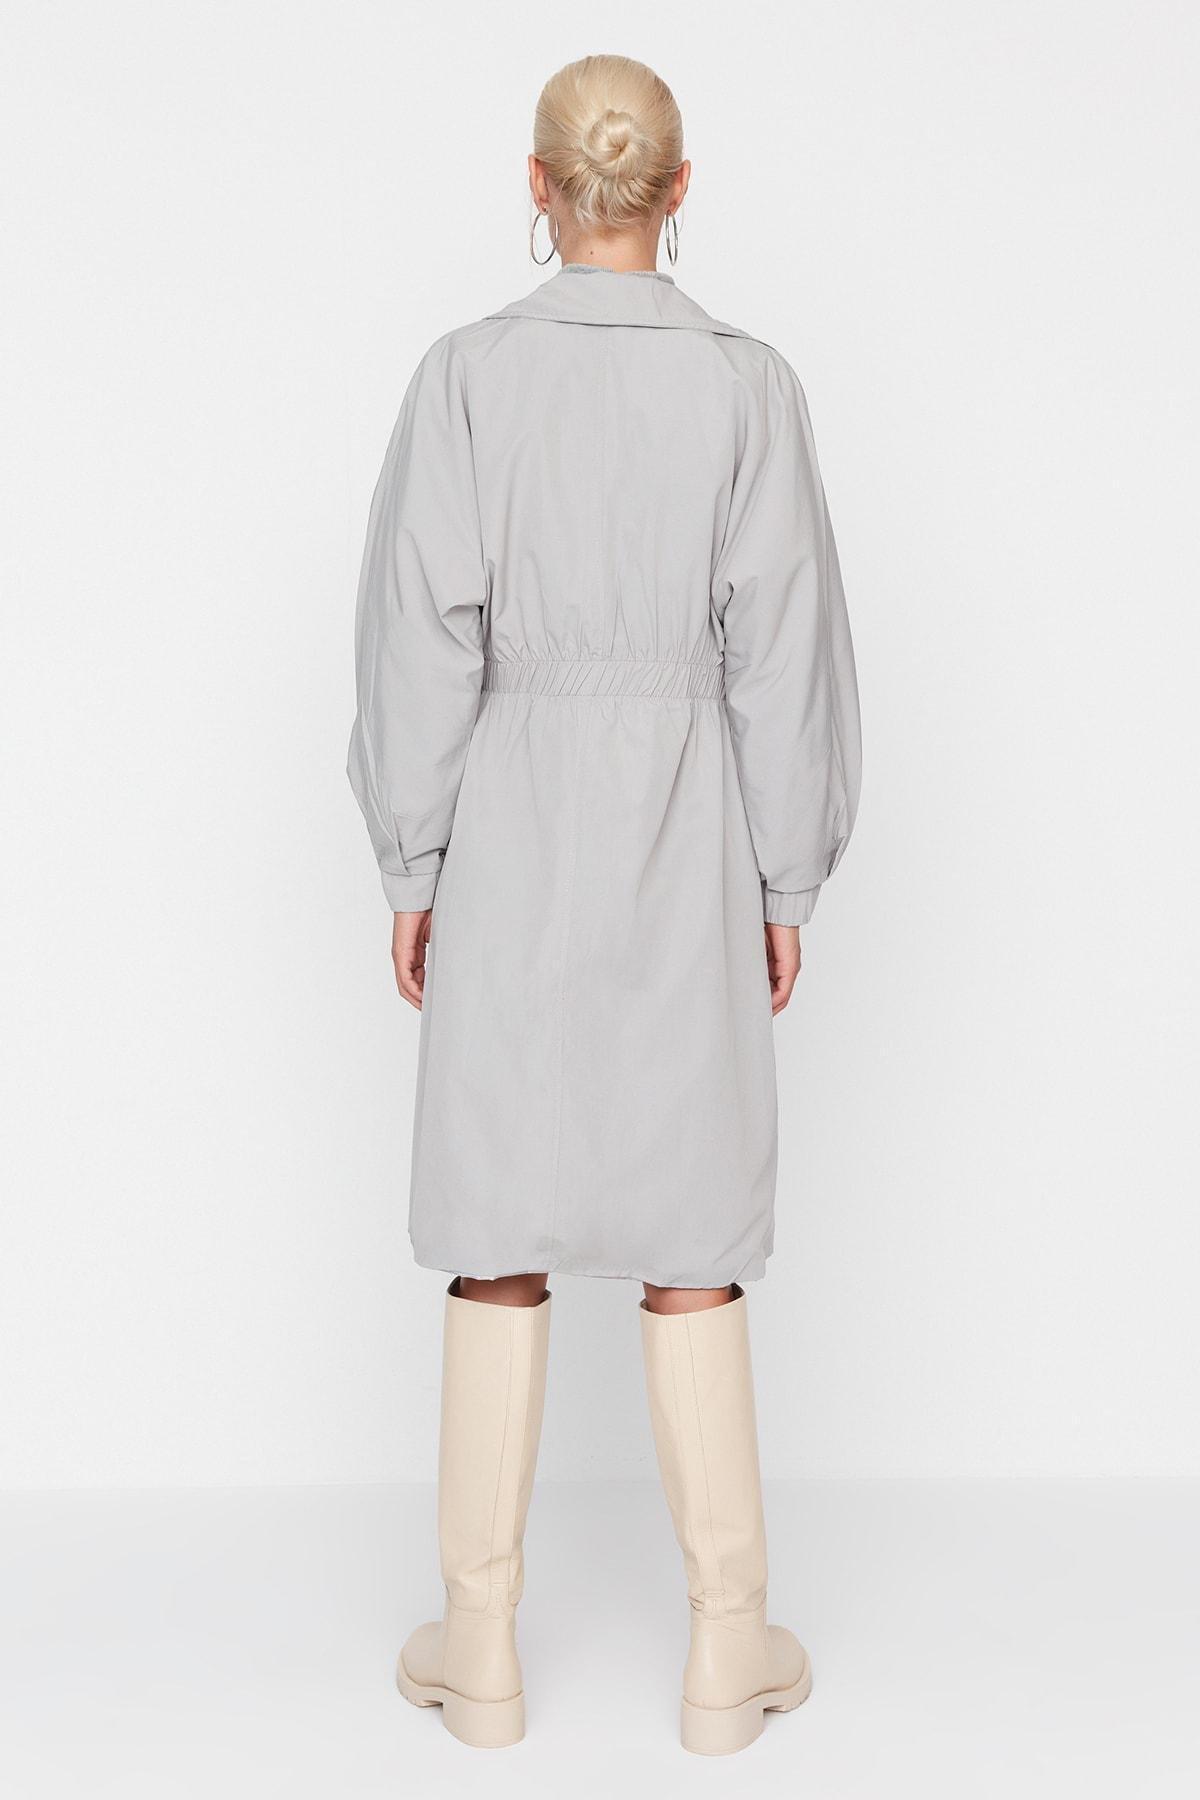 Trendyol - Grey Double Breasted Trench Coat